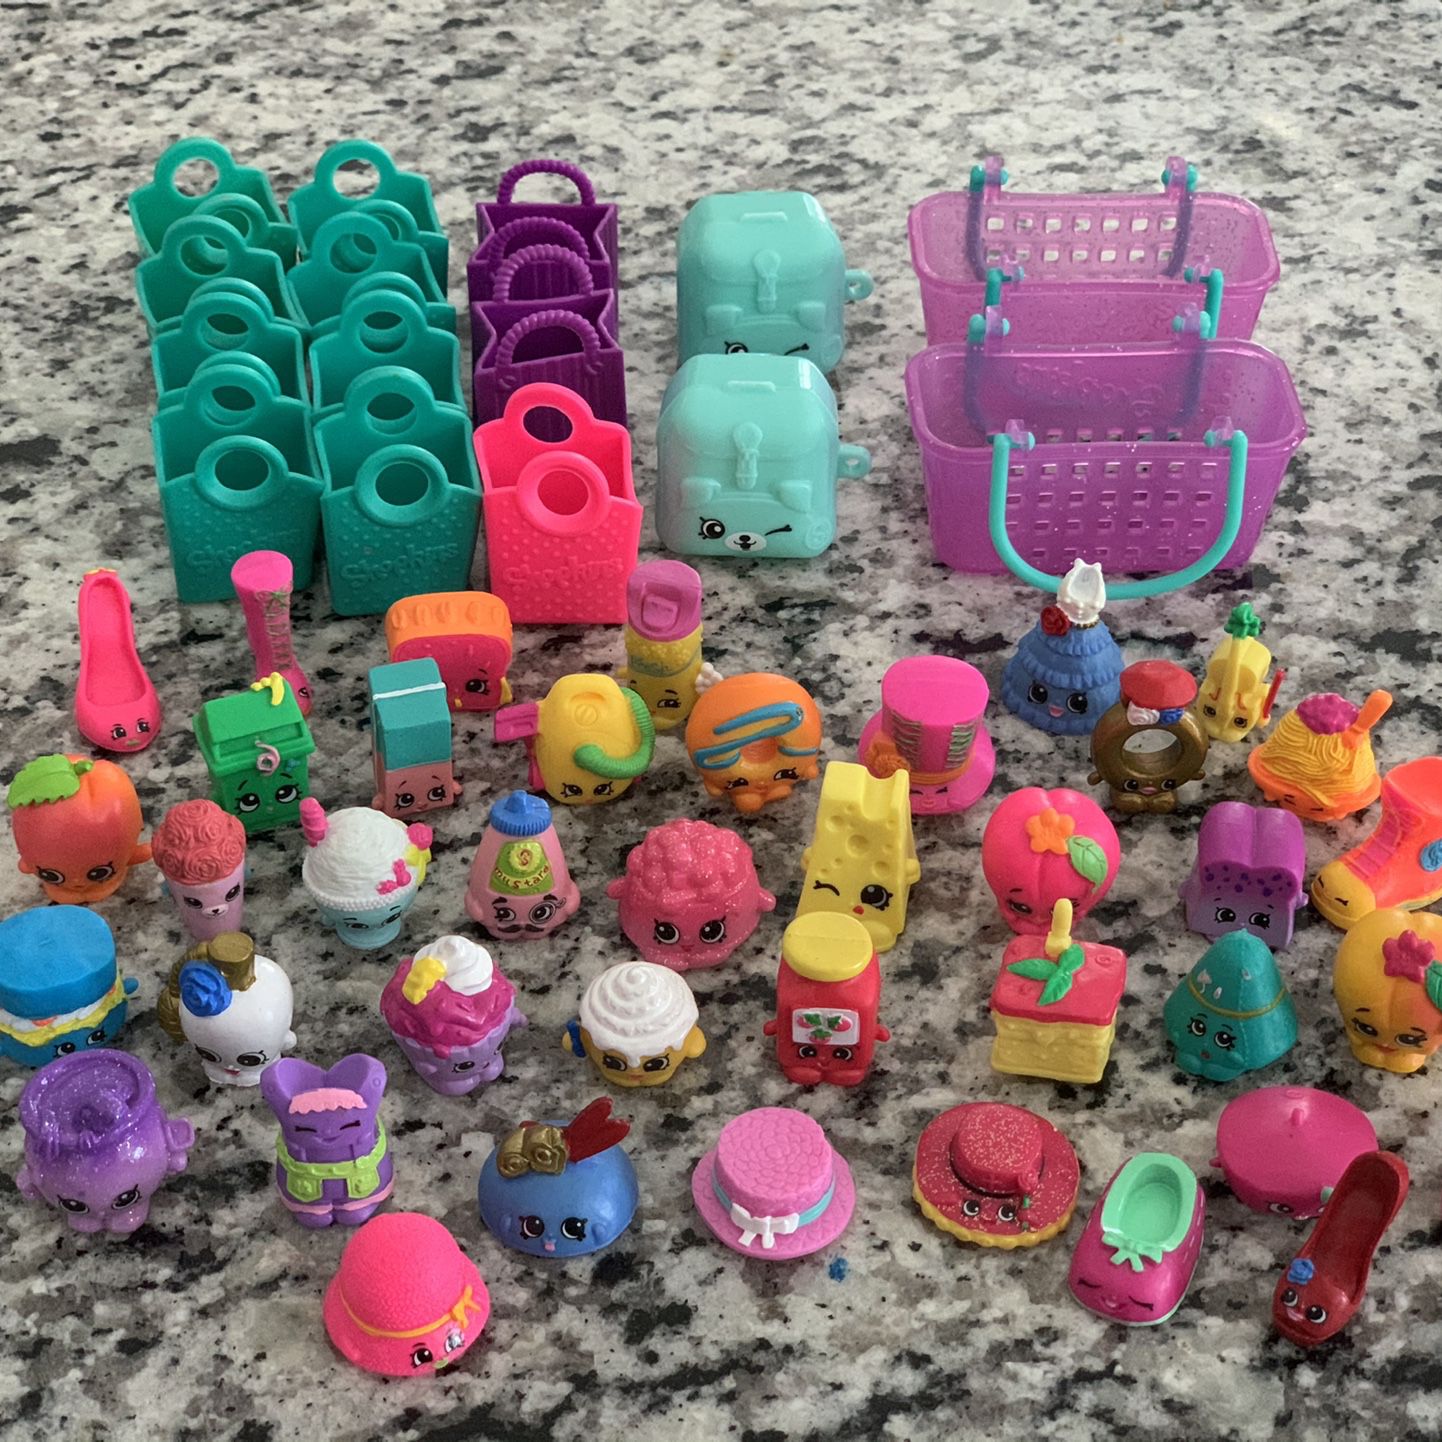 40 Shopkins and Accessories